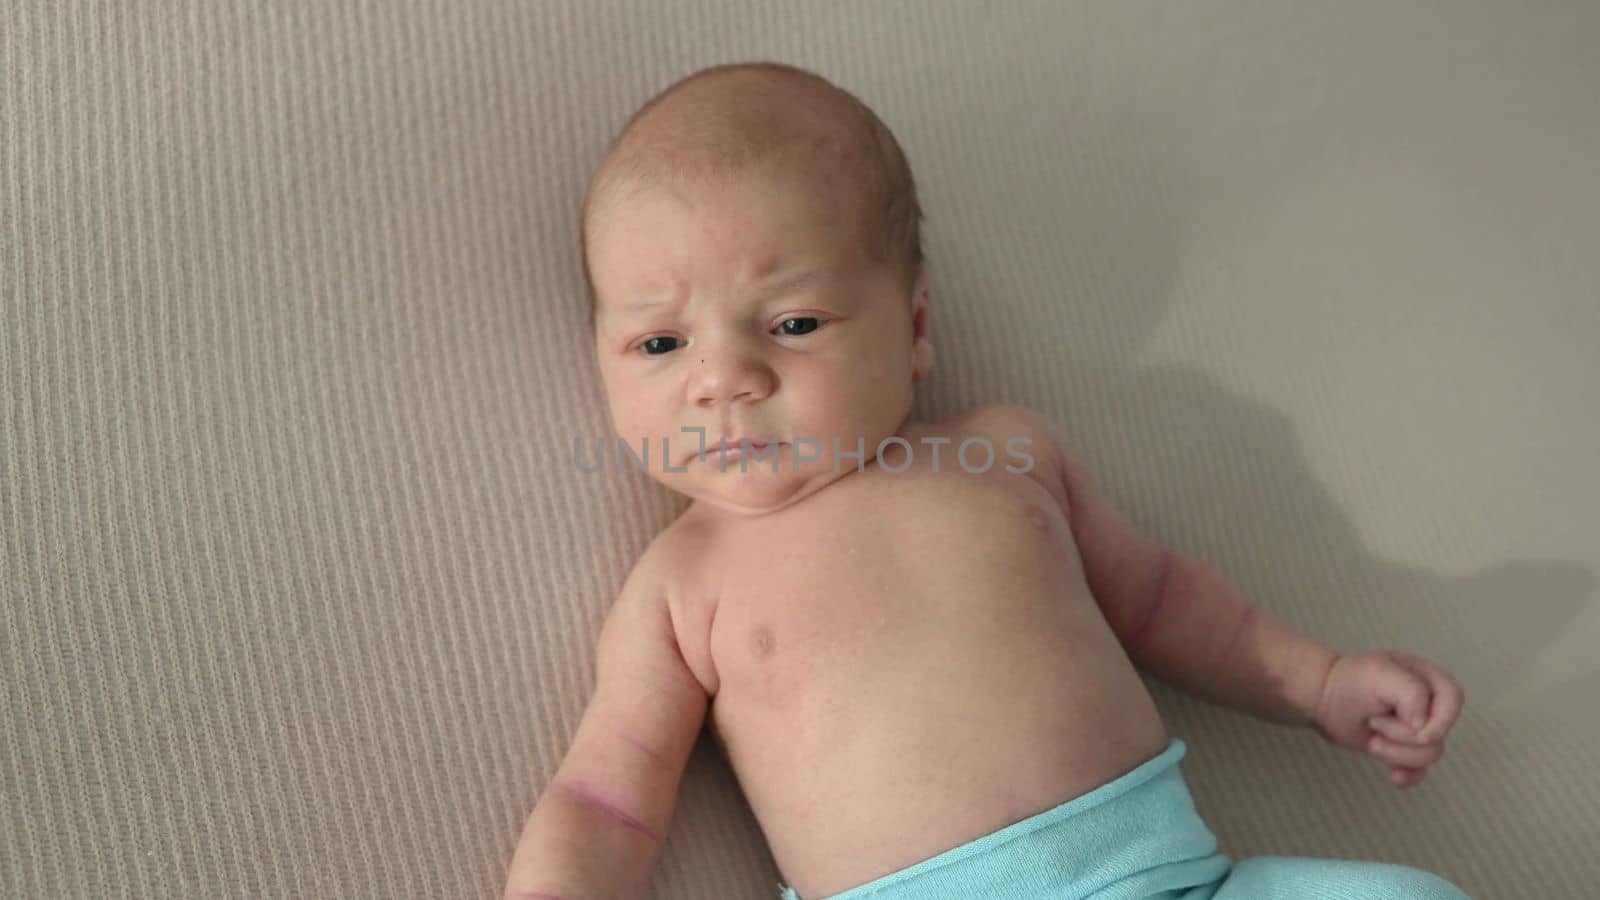 Newborn baby boy lying in bed and lloking around seriously. Infant child portrait at home